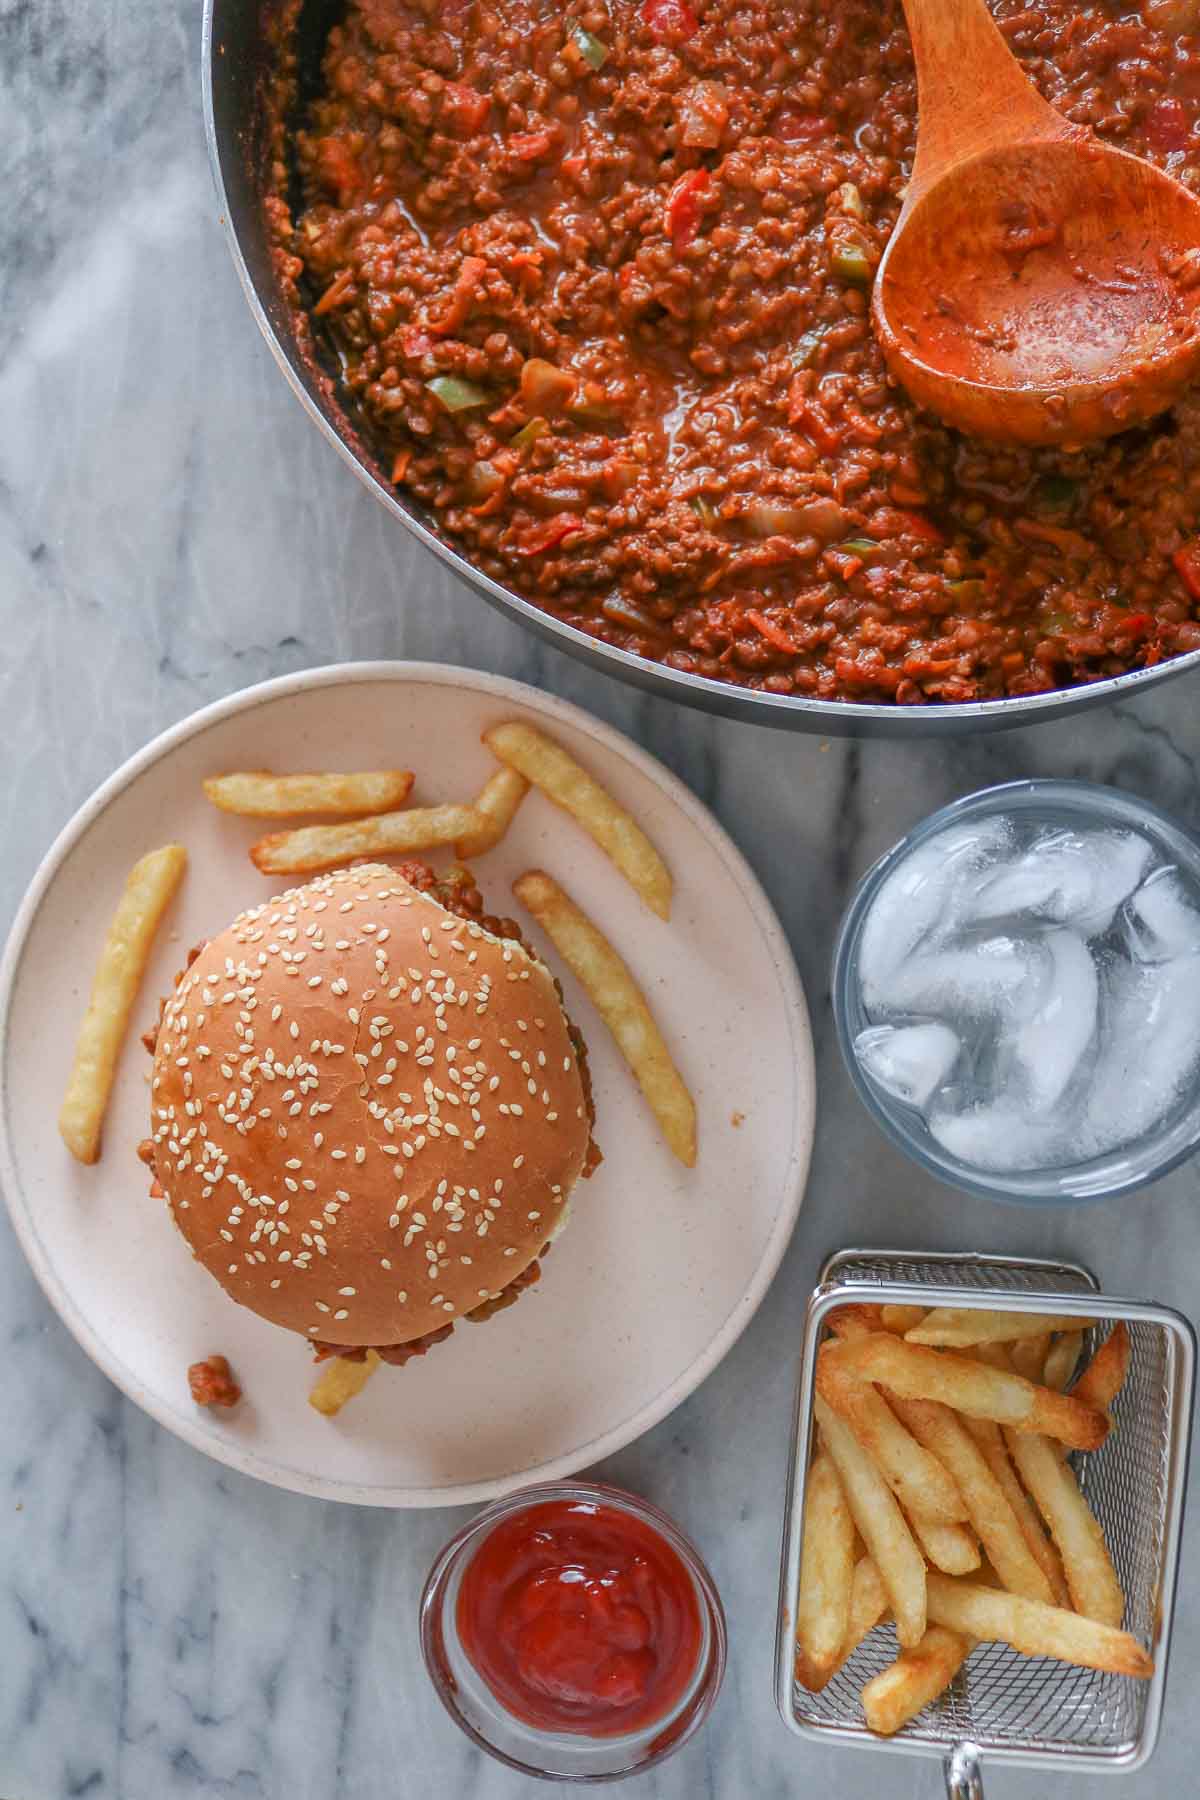 Overhead shot of a sloppy joe and fries next to a pan of the mixture, ketchup and glass of water.